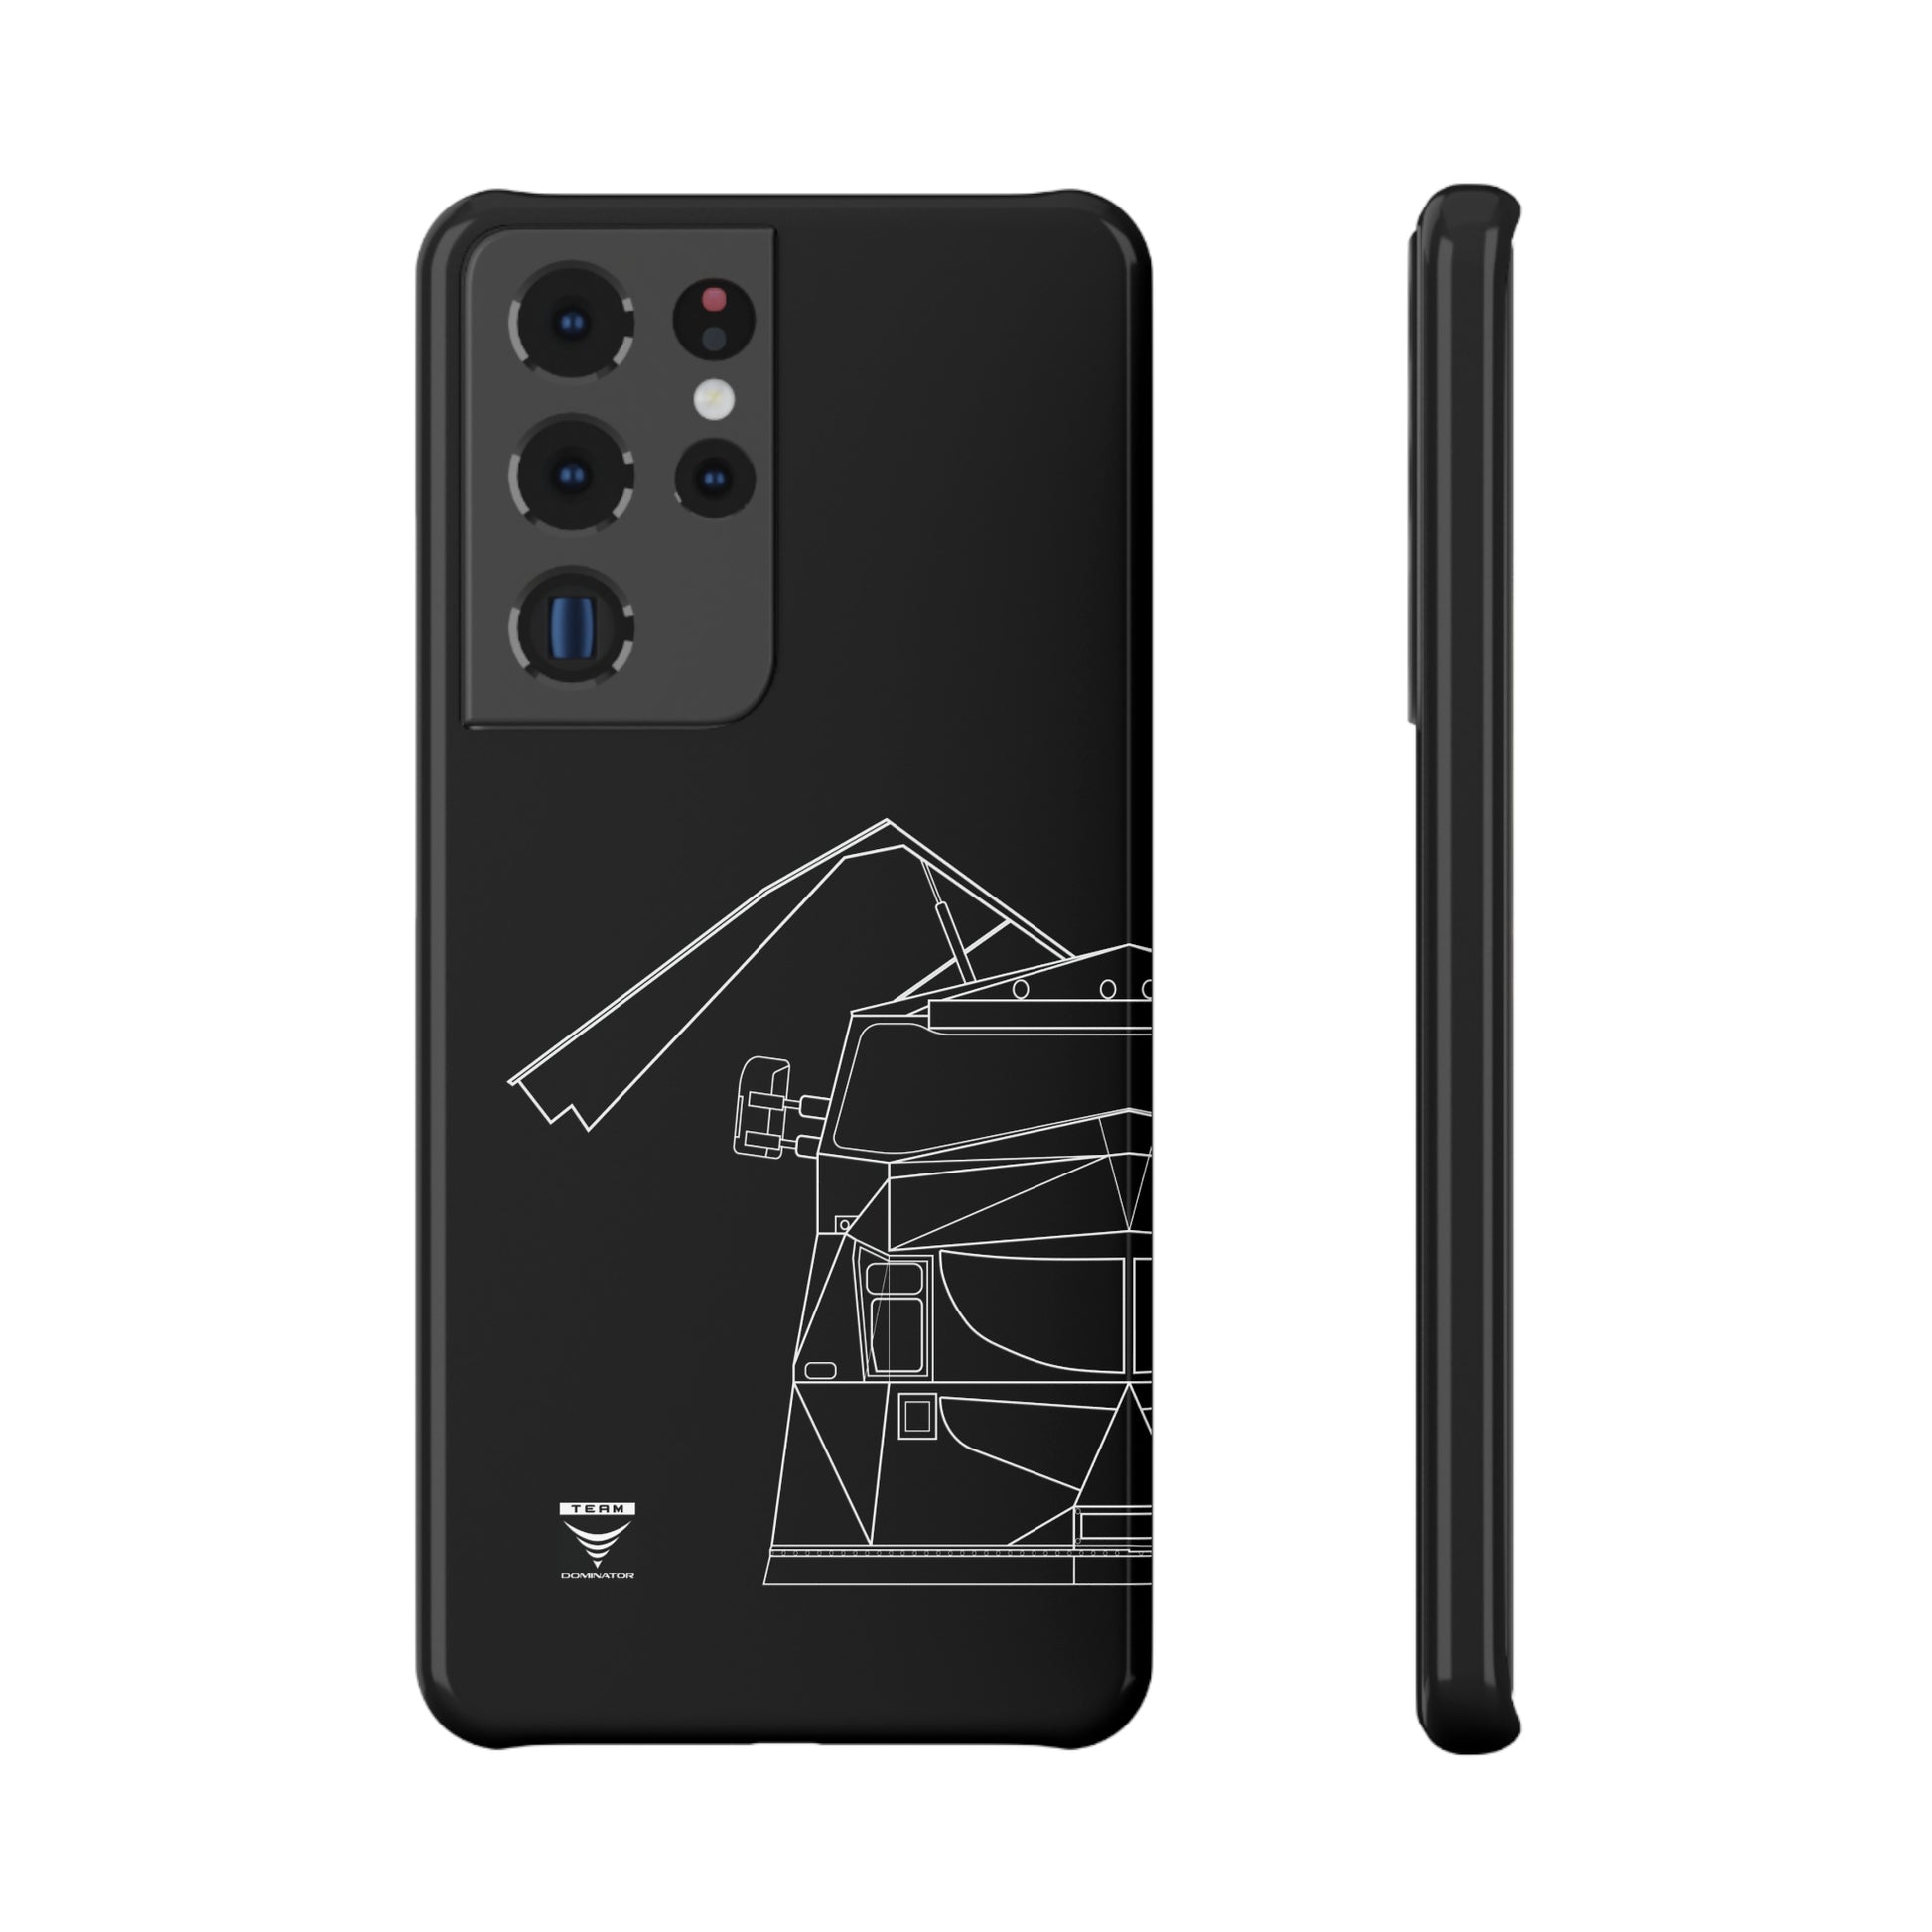 Dominator 3 Wireframe Samsung Phone Case - Never Stop Chasing